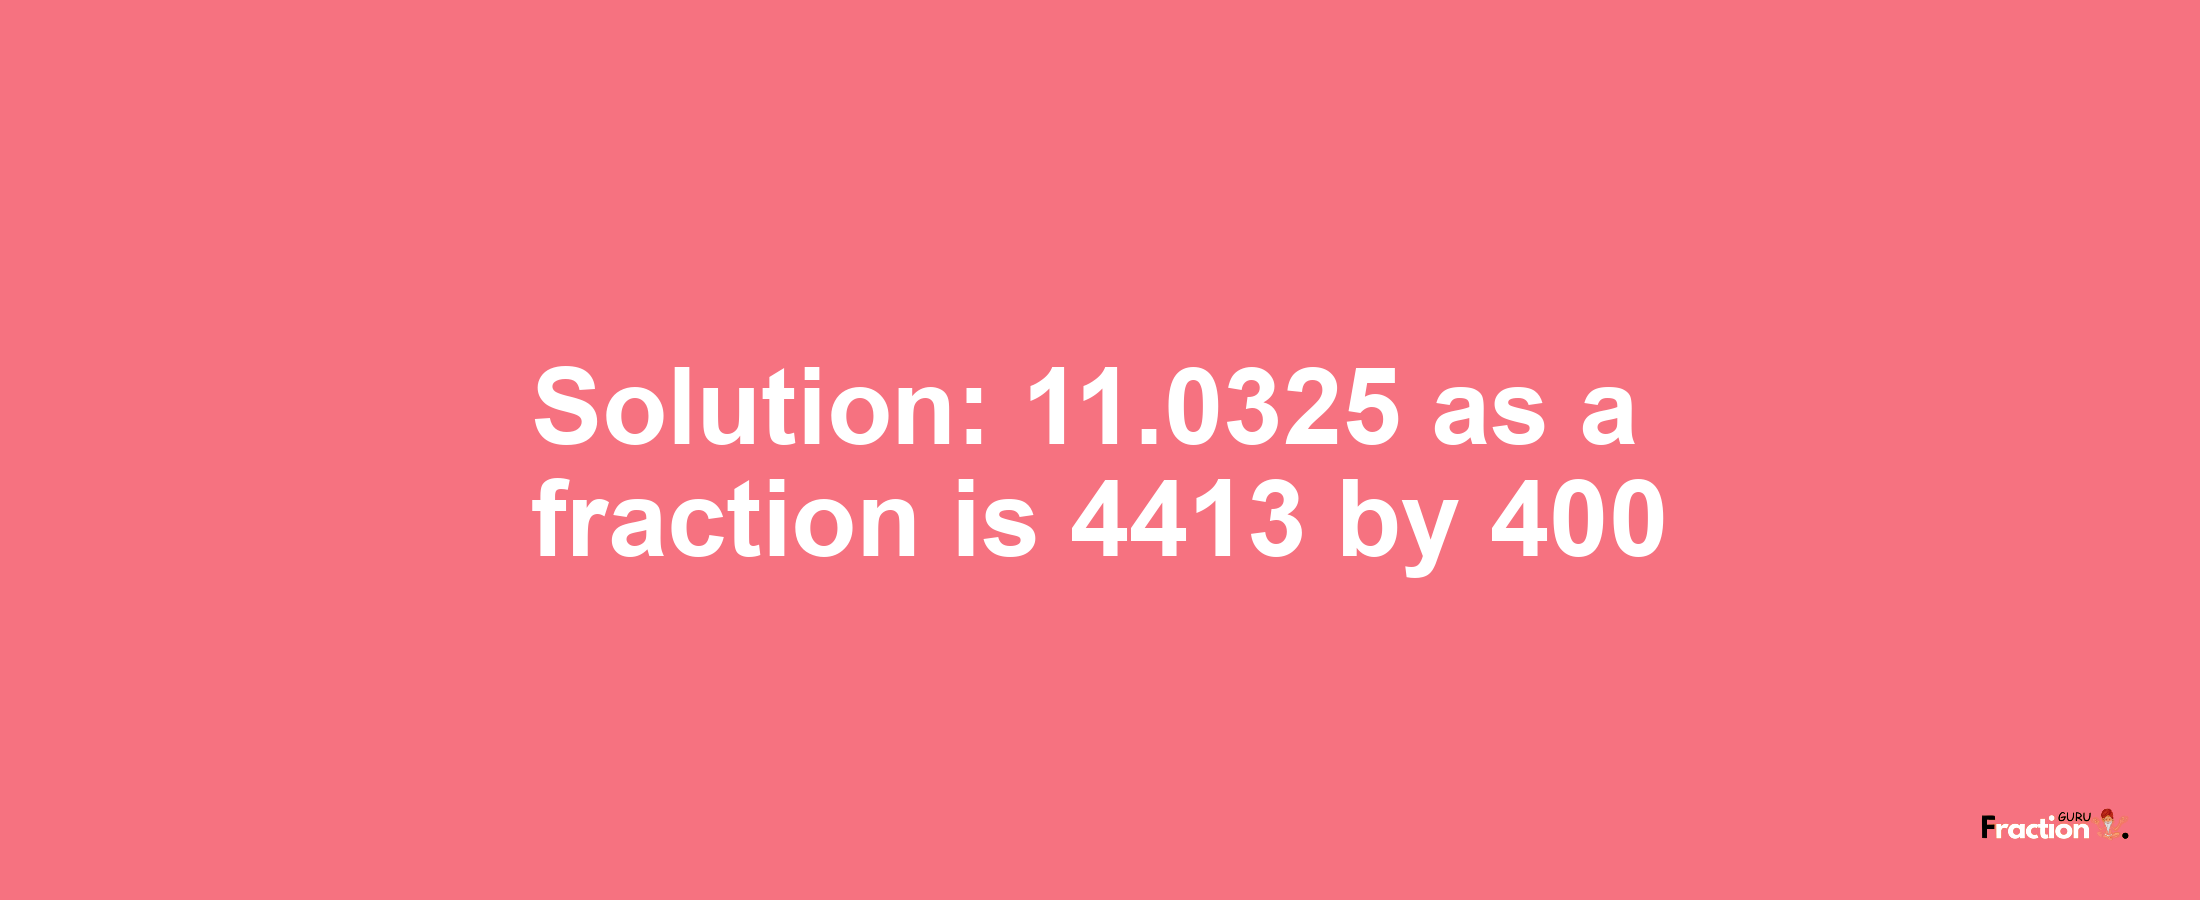 Solution:11.0325 as a fraction is 4413/400